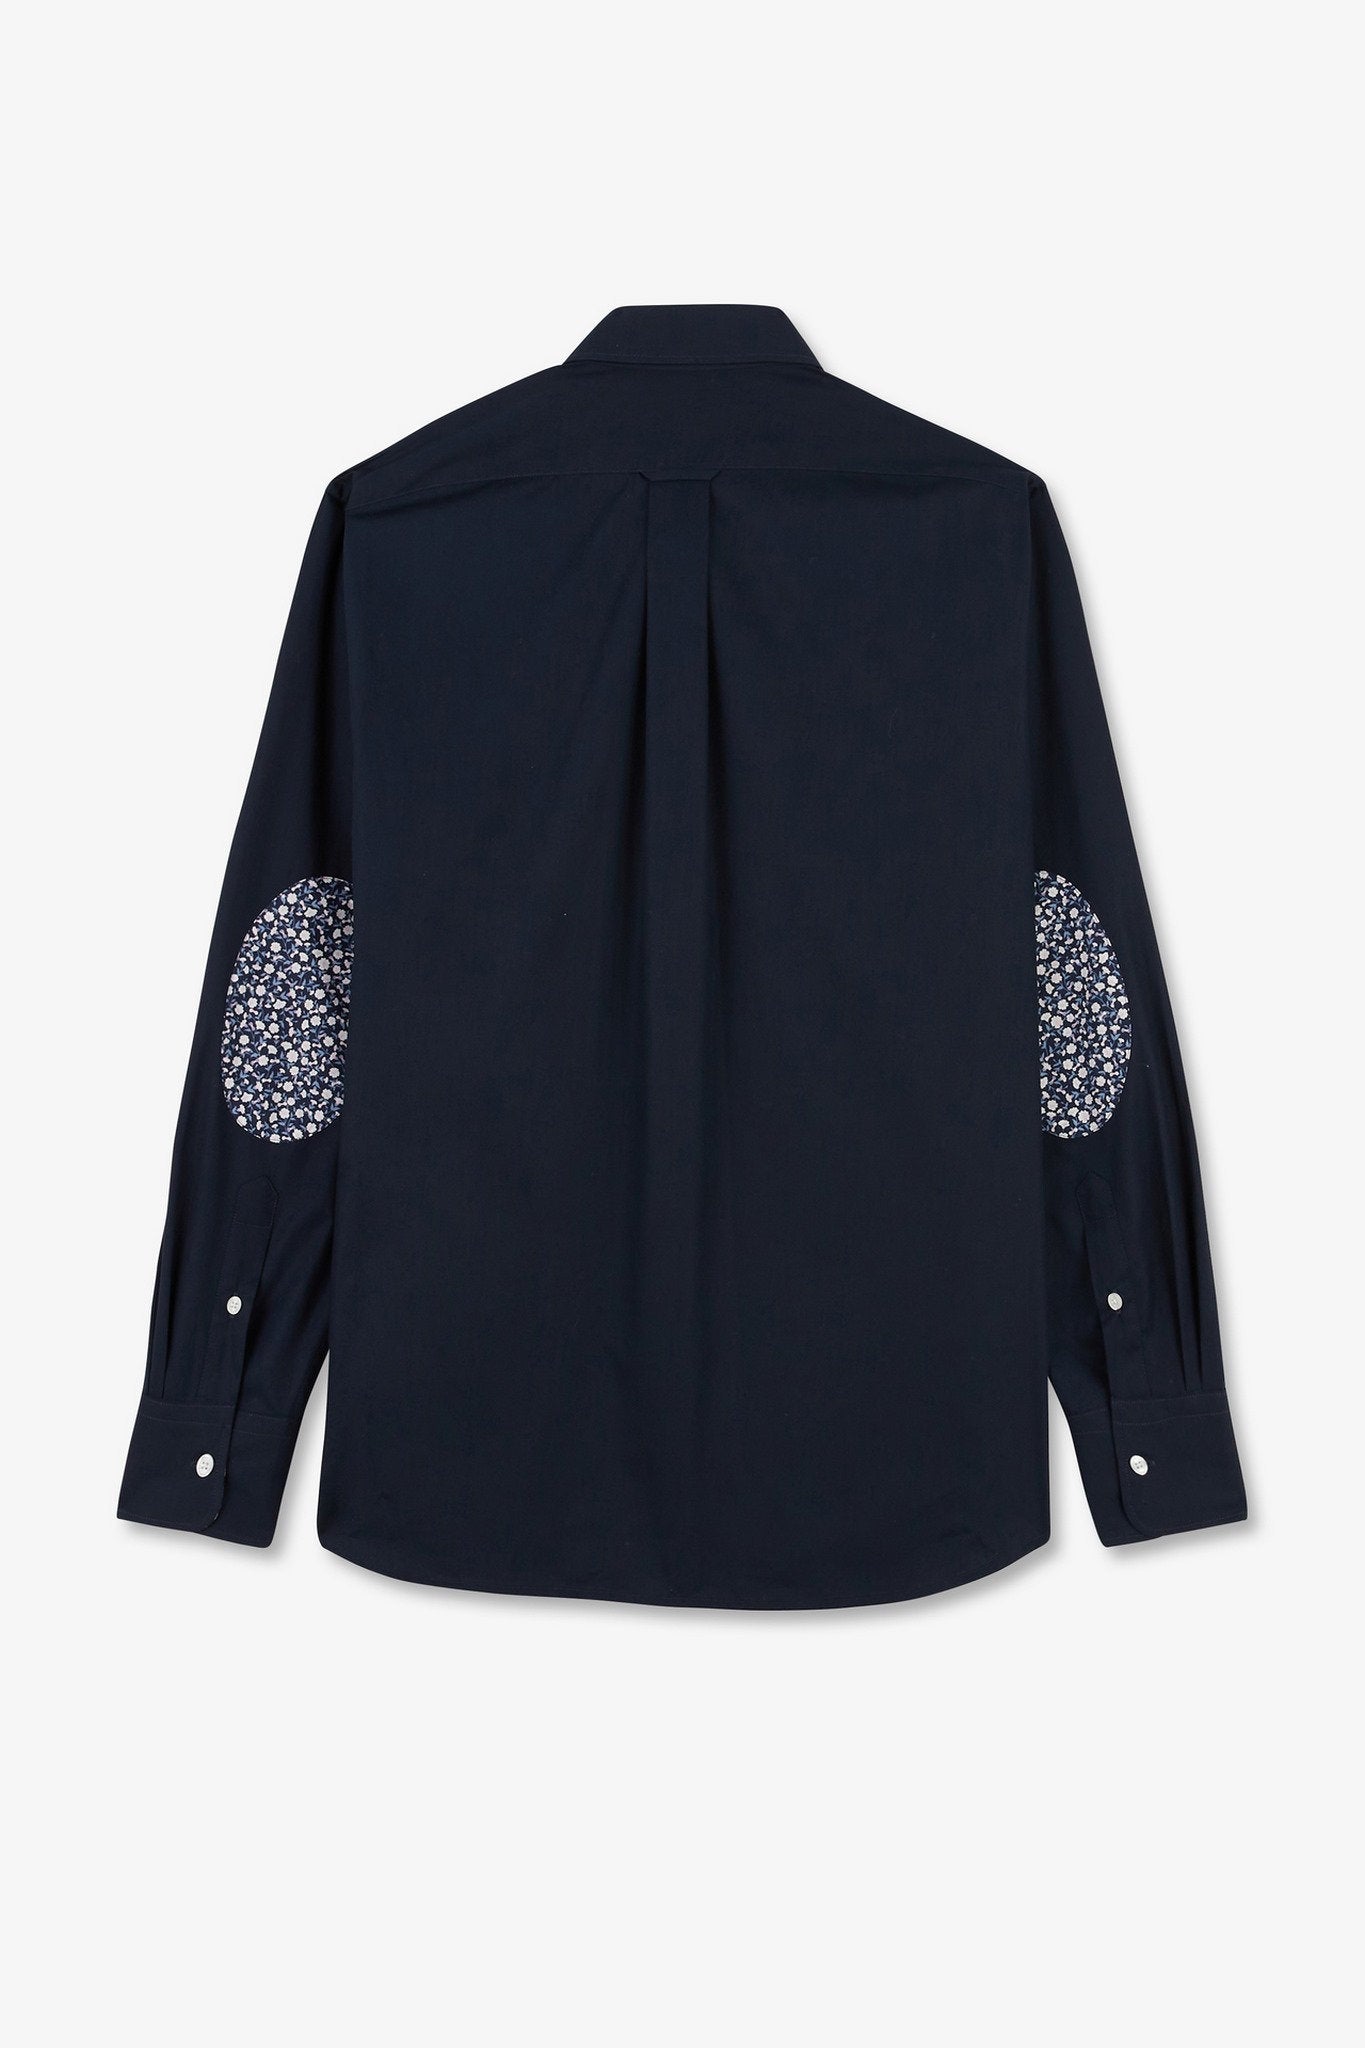 Navy Blue Shirt With Floral Detail_E24CHECL0002_BLF_05